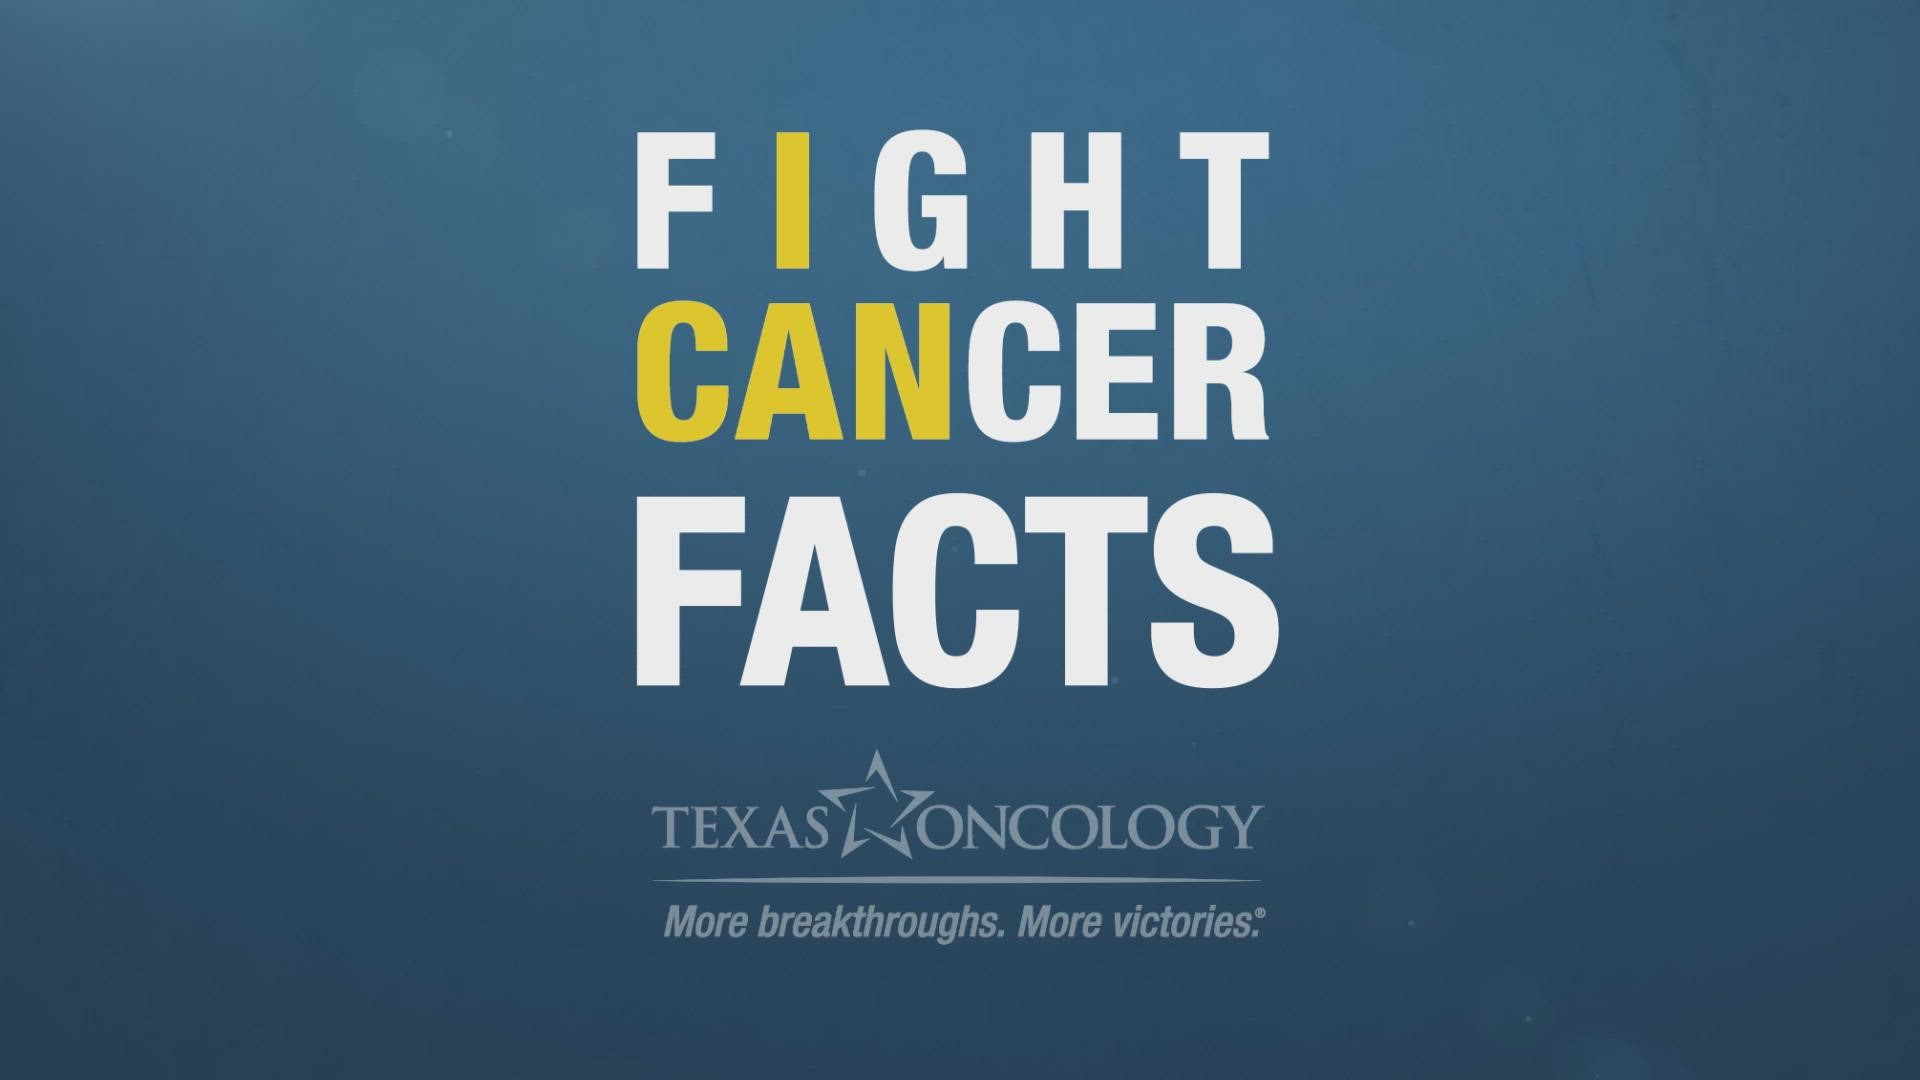 Local Texas Oncology doctor shares how surgery can be useful to diagnose cancer, determine its stage of development, and treat it.